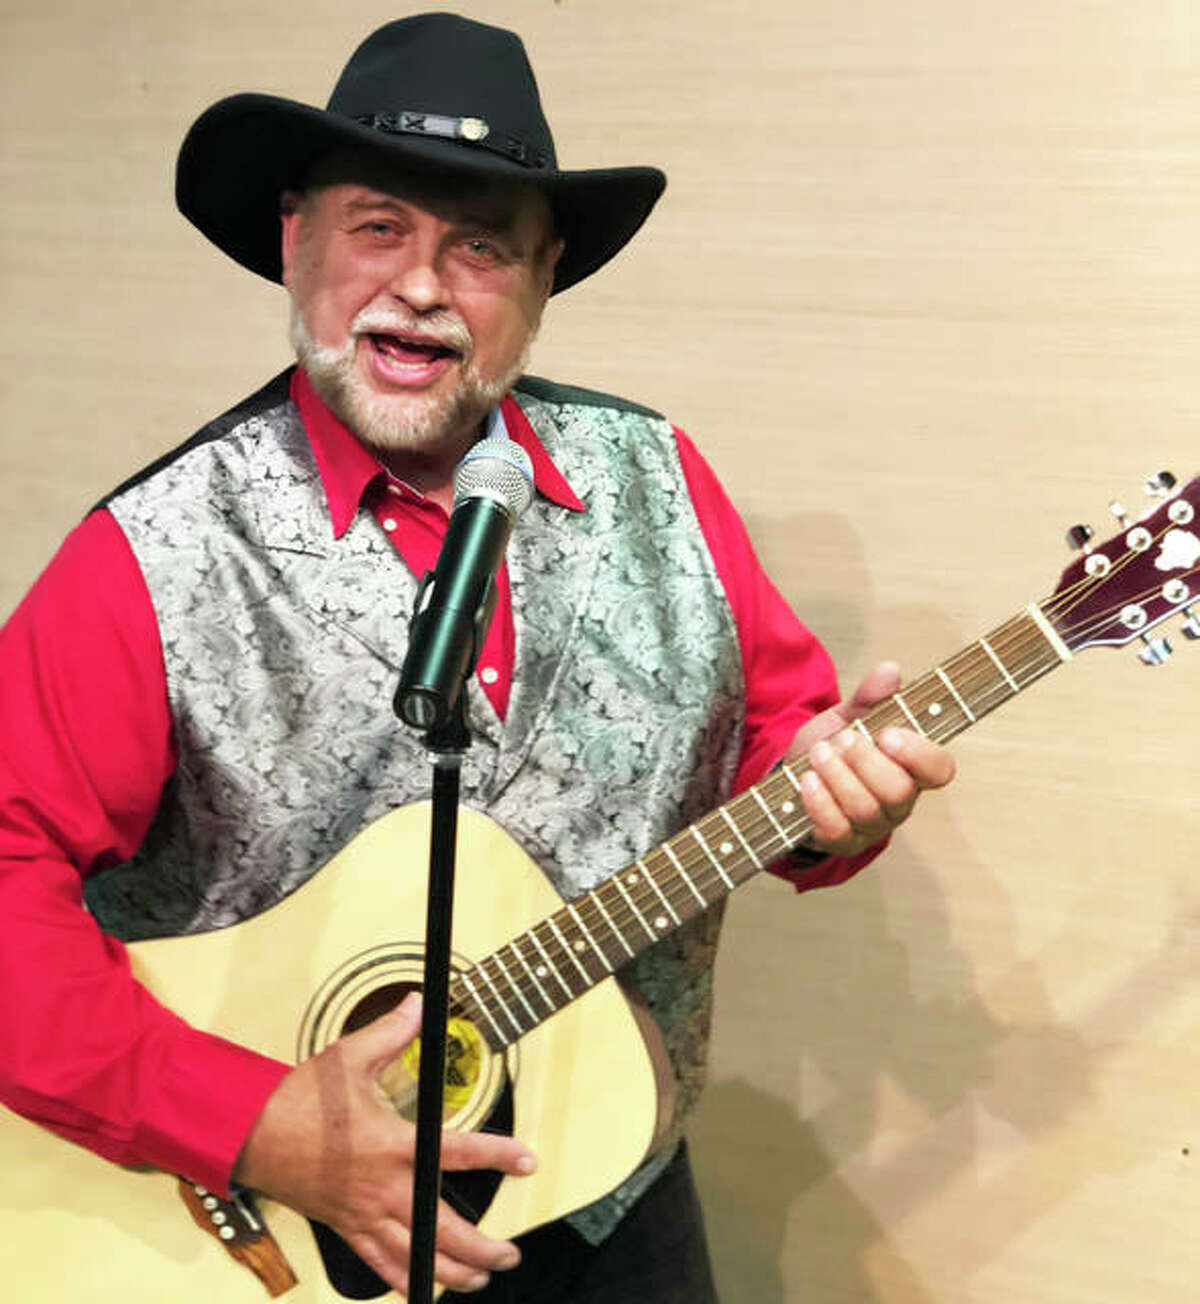 Alton Little Theater’s Kevin Frakes will perform Friday, Feb. 21, through Sunday, Feb. 23, in the “Kenny Rogers & Company” tribute at the Alton Little Theater Showcase. Frakes wrote and produced the show.